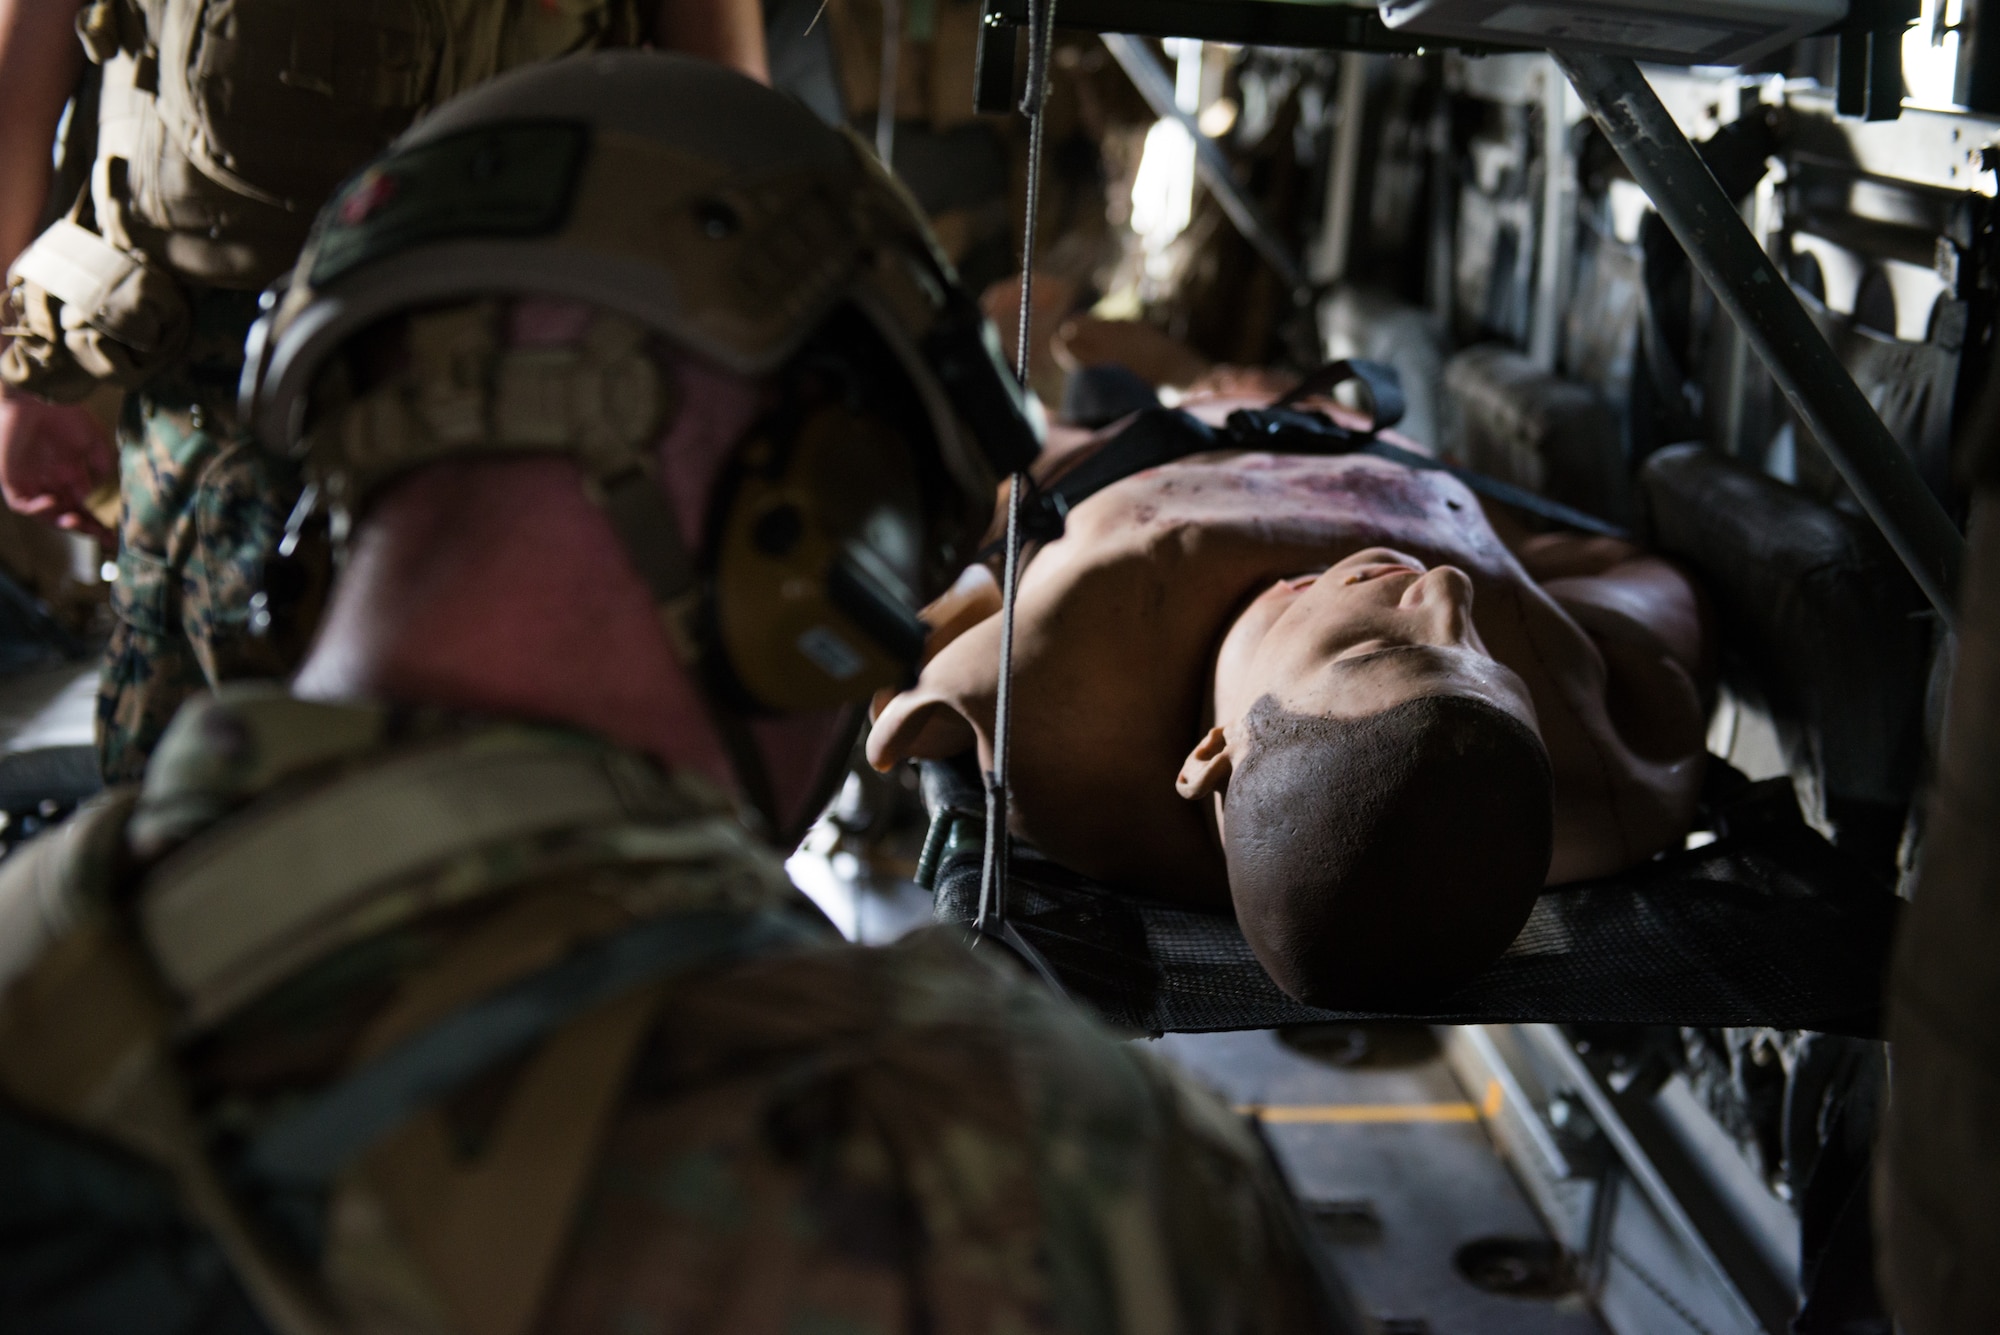 A member of the U.S. Air Force from the 353rd Special Operations Squadron, respond to a simulated casualty during a medical exercise, June 6, 2018, at Camp Hansen, Okinawa, Japan. The Air Force performs joint medical exercises with other U.S. forces regularly in Okinawa to better prepare service members for real world emergencies. (U.S. Air Force photo by Senior Airman Thomas Barley)